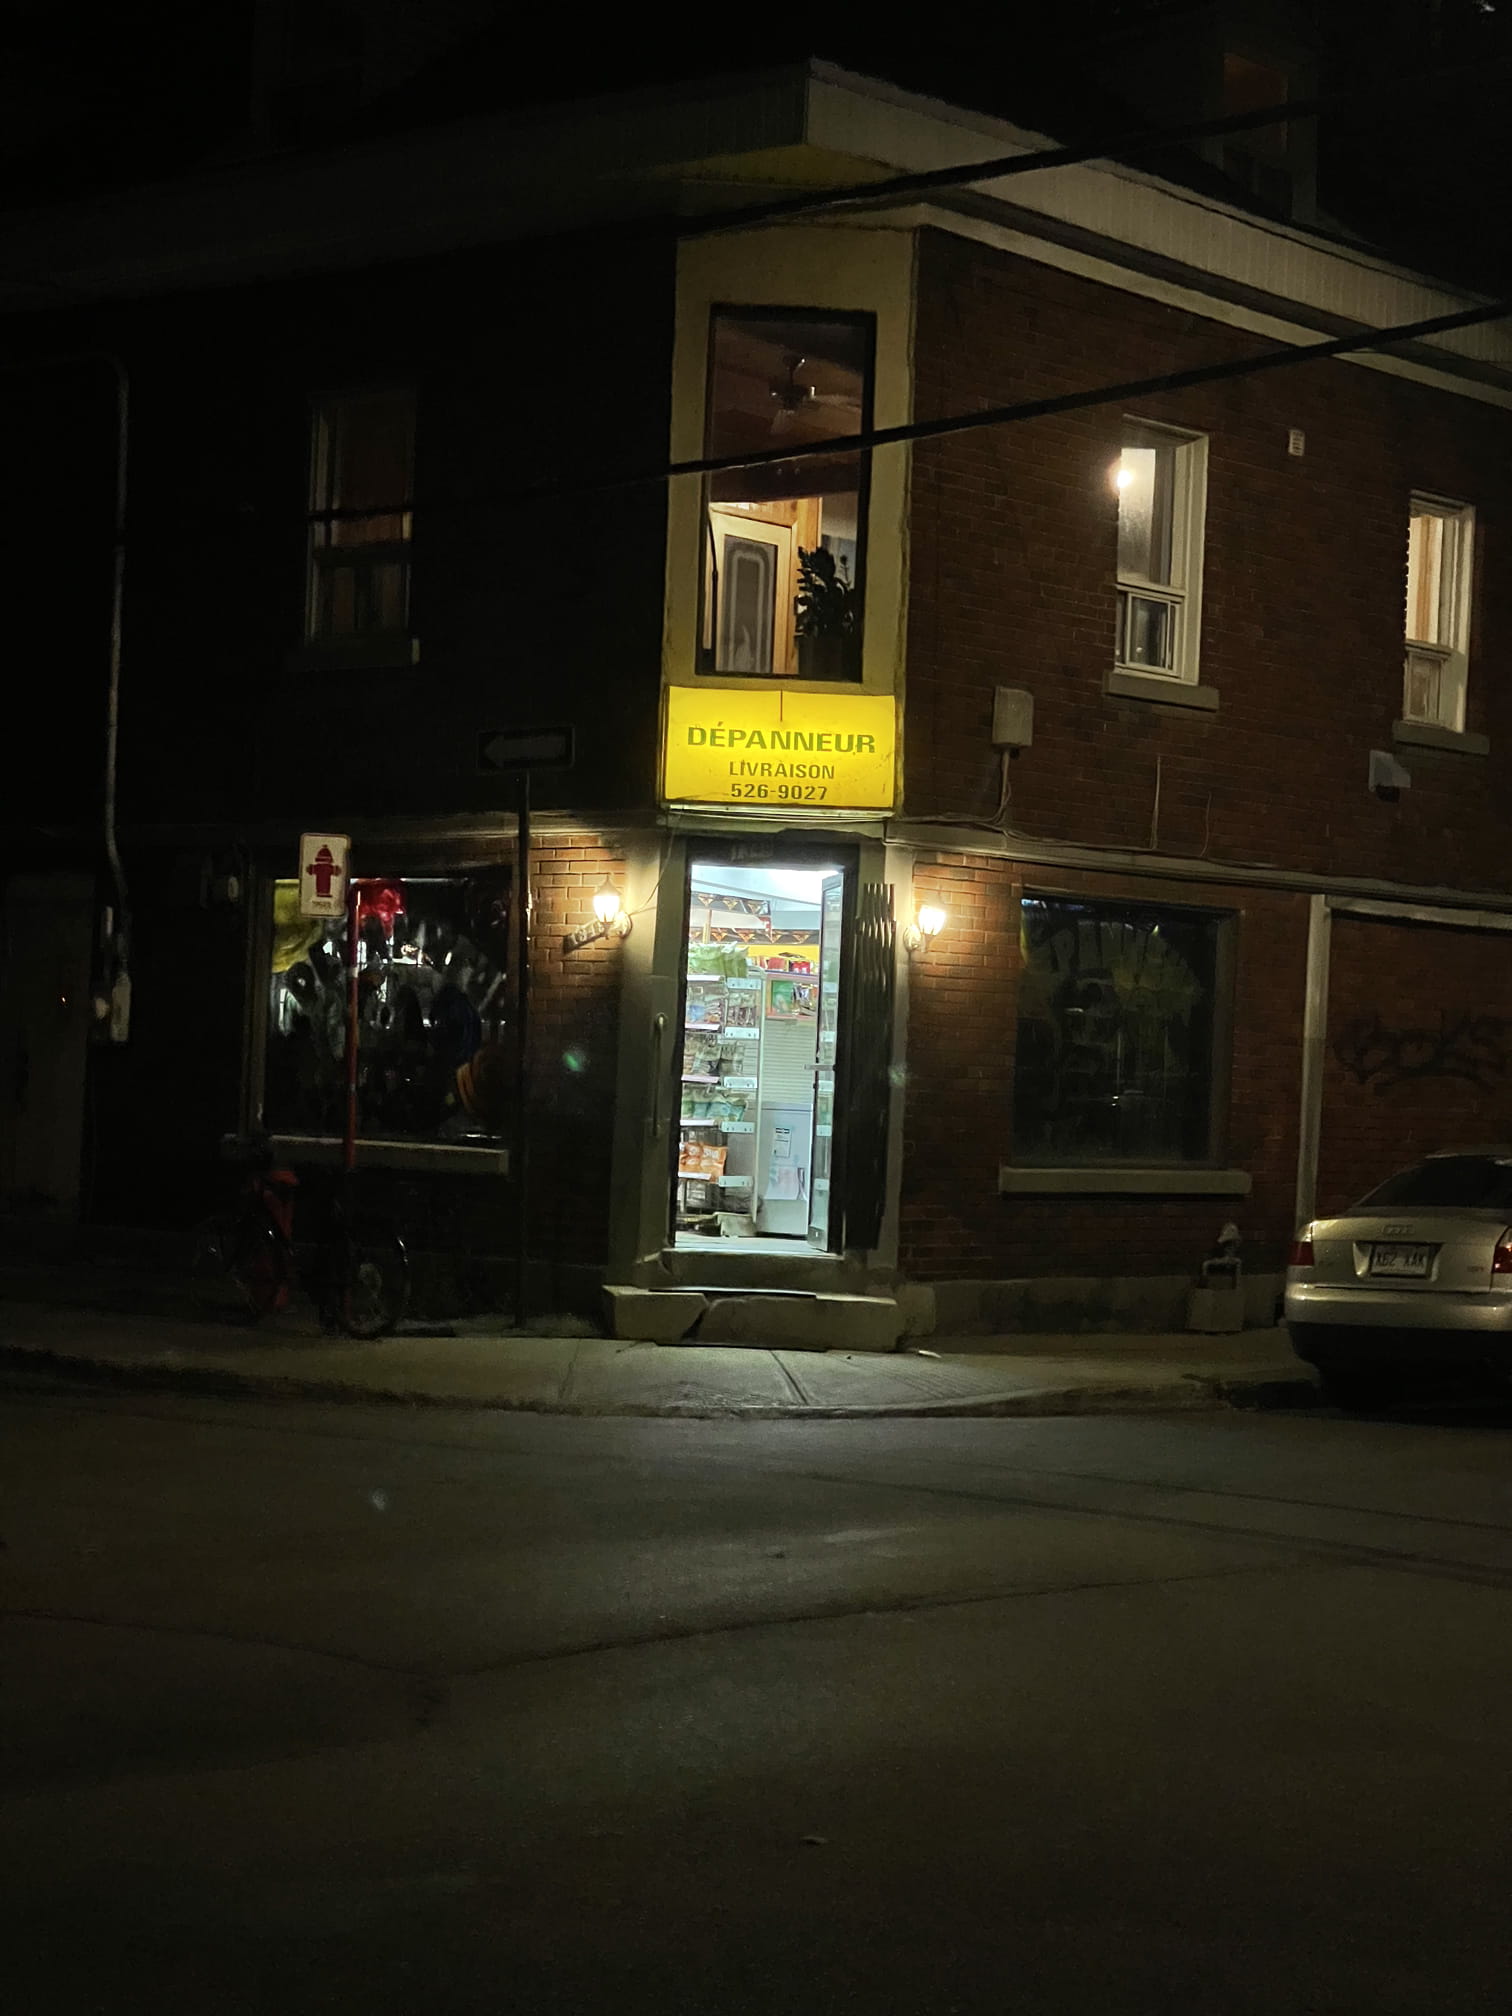 Idek i think its a corner store. In montreal